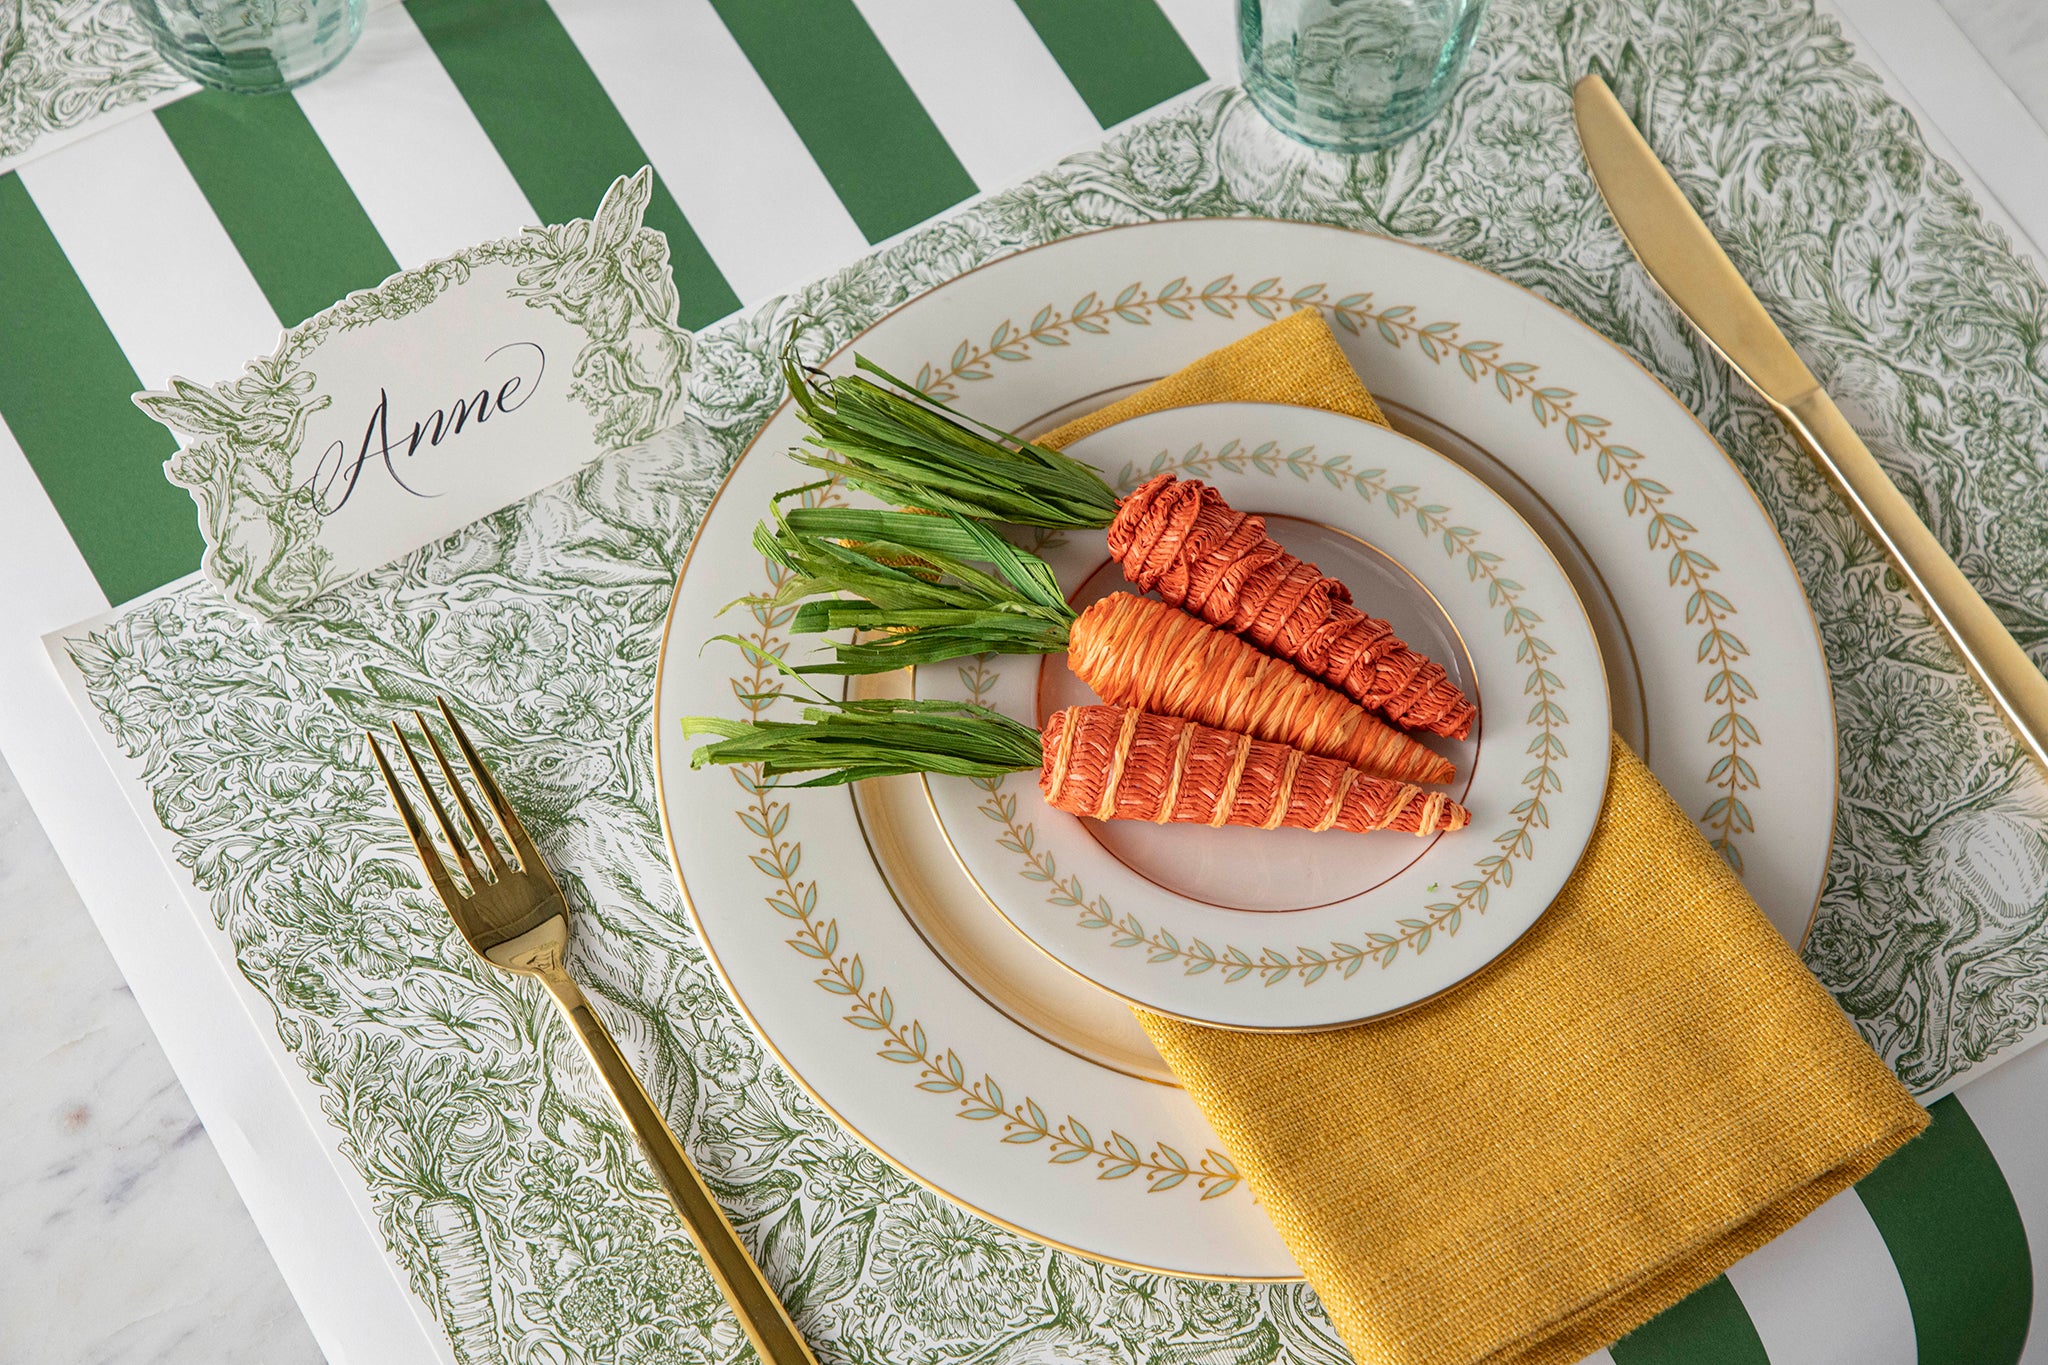 A place setting with carrots on a green and white plate.